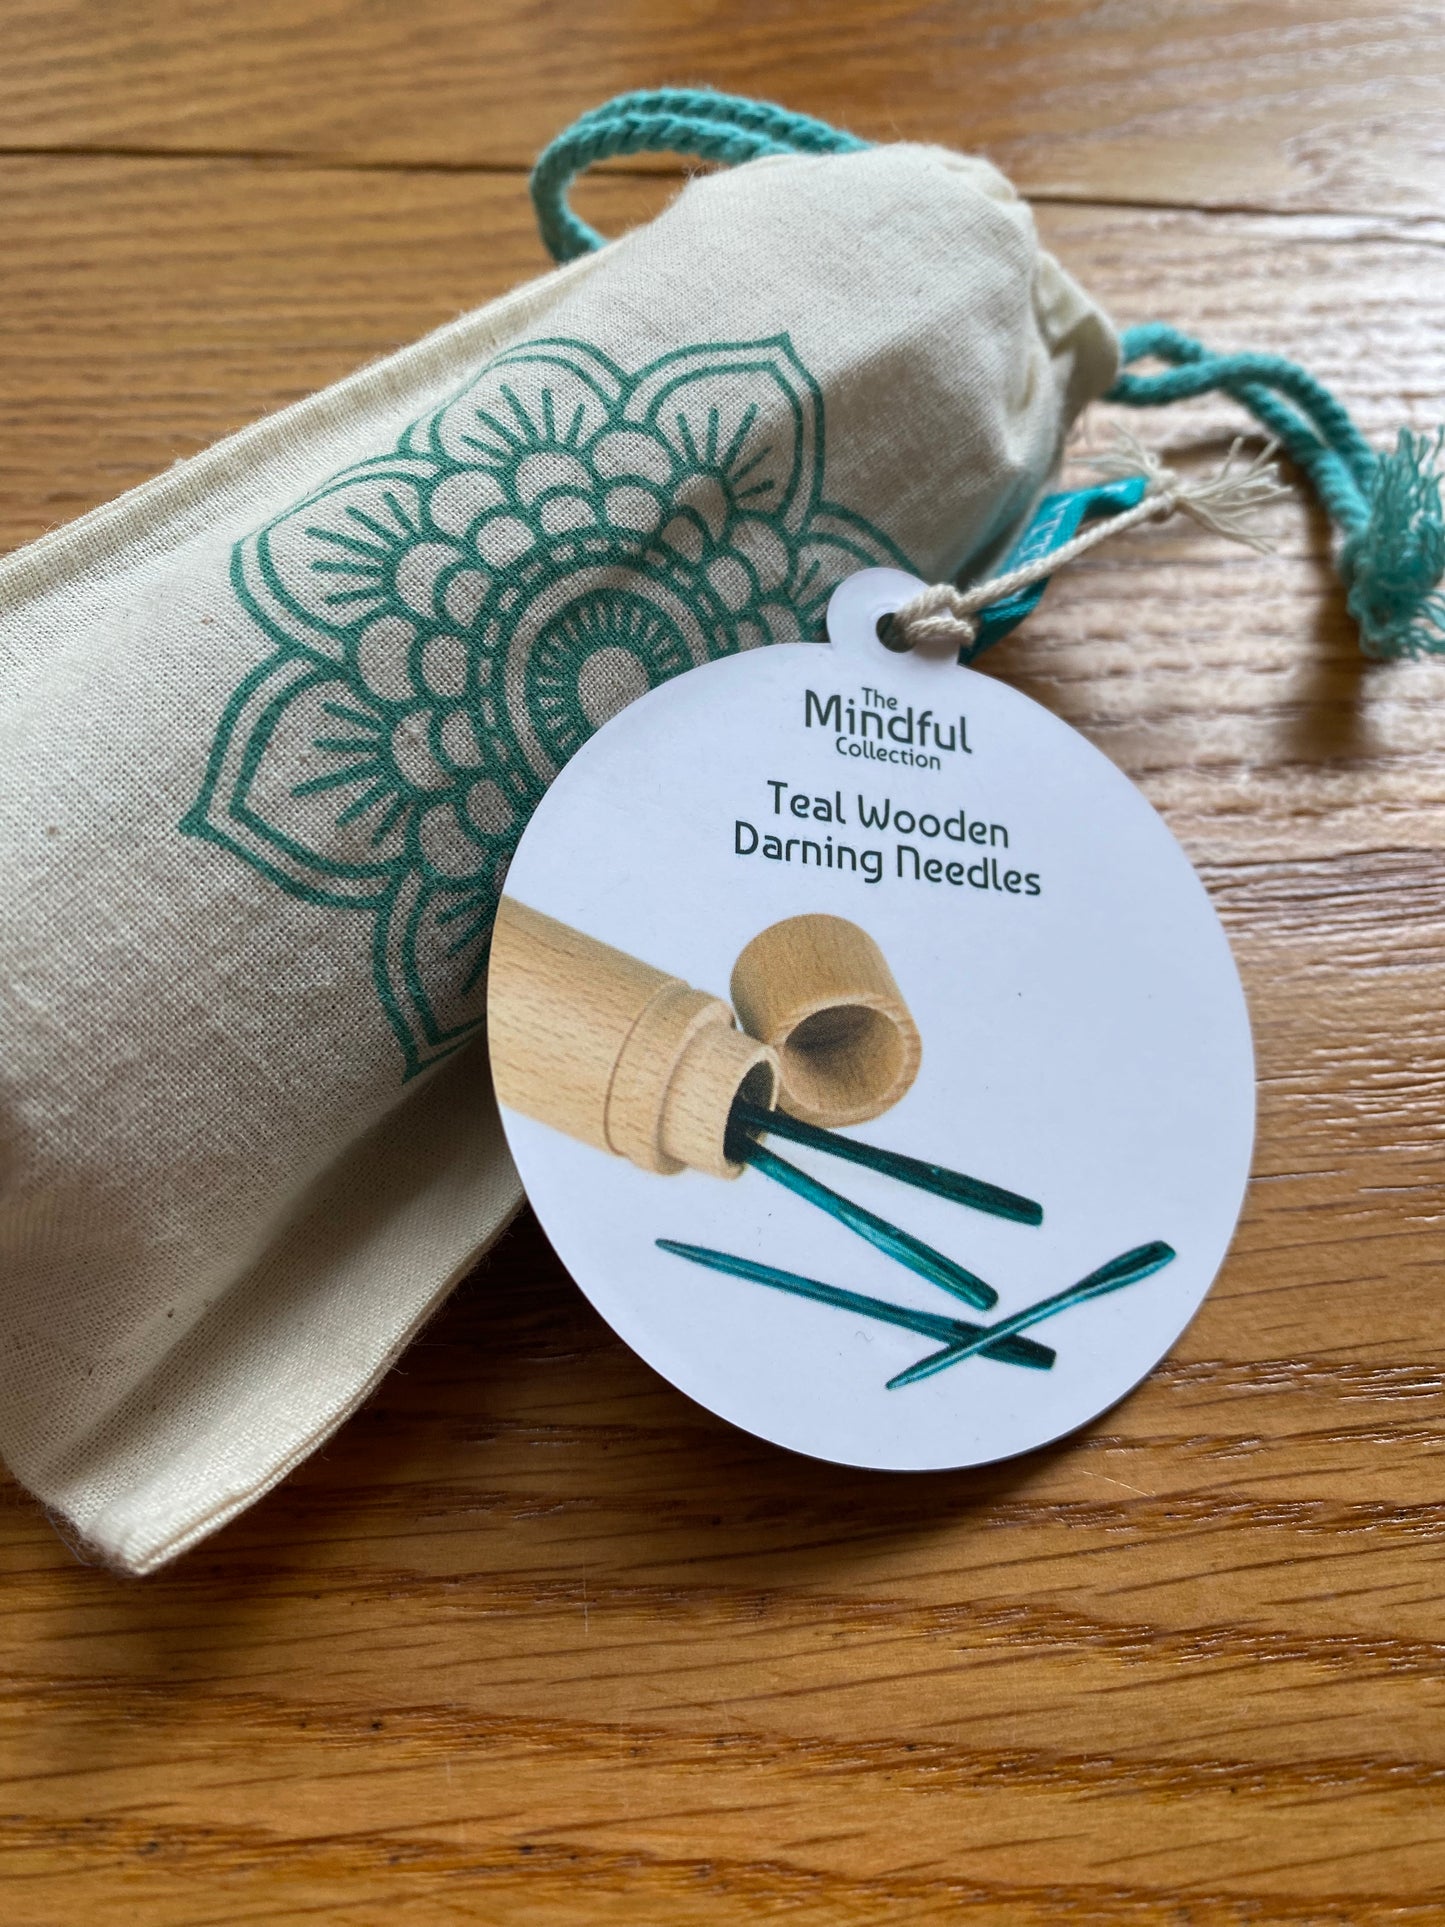 The Mindful Collection Tea Wooden Darning Needles